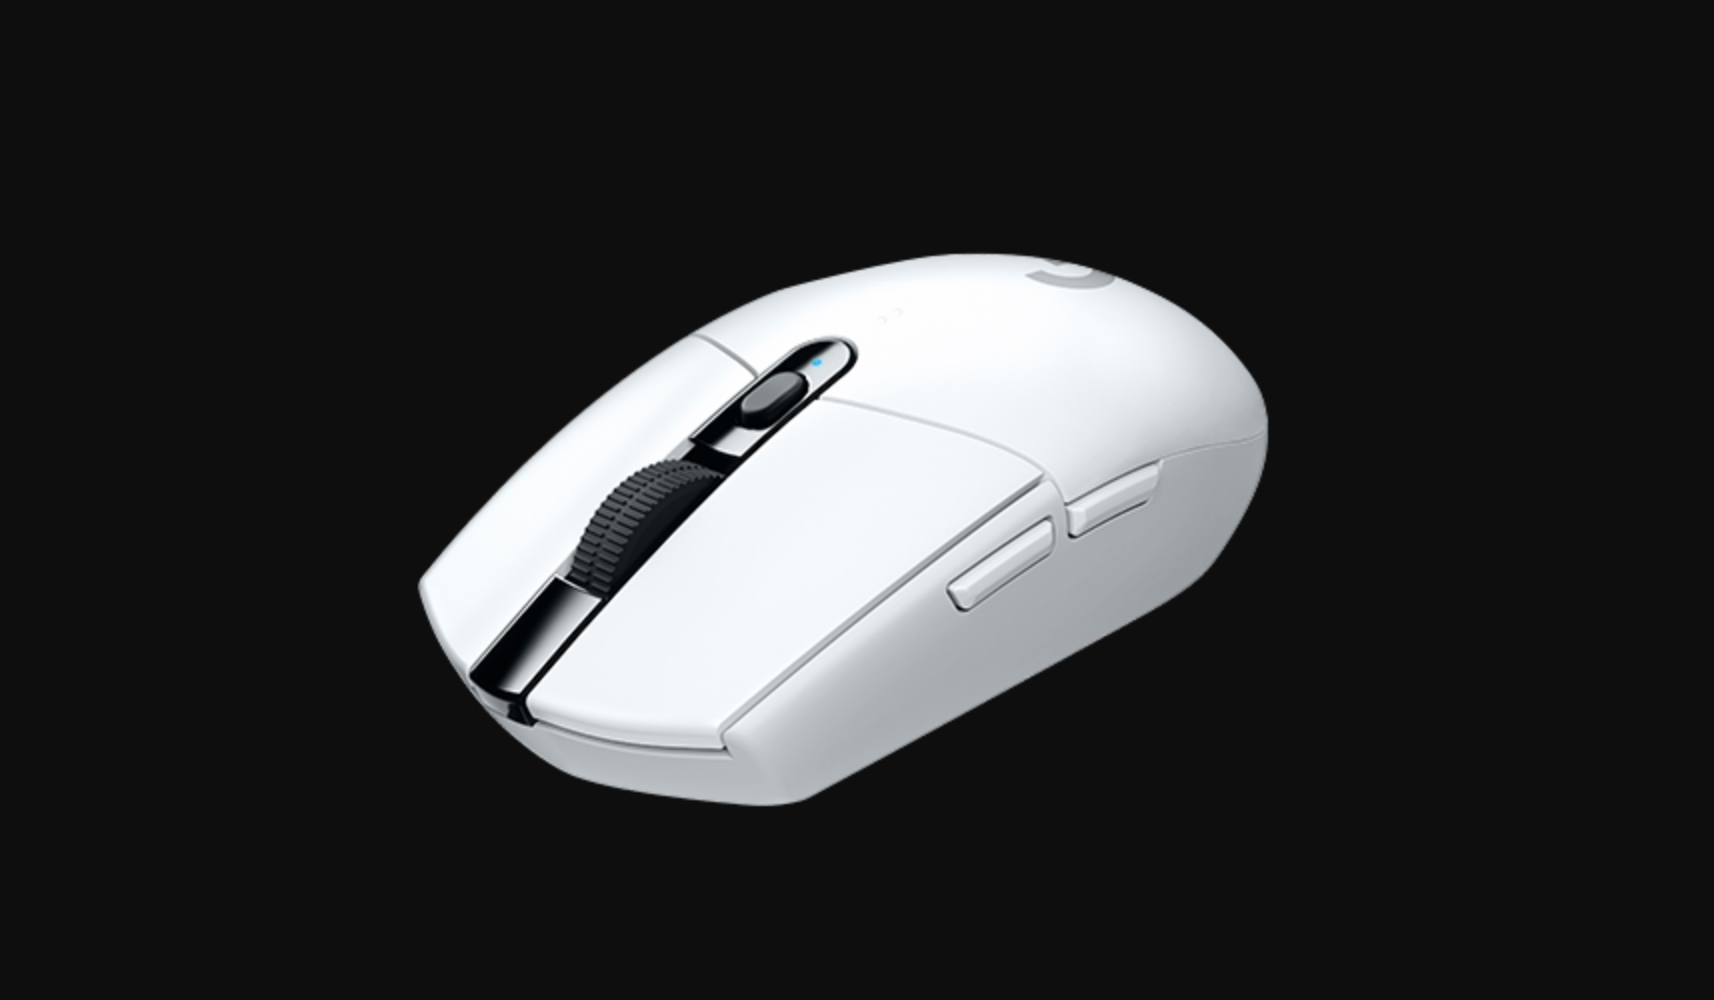 Logitech G305 in white on a black background